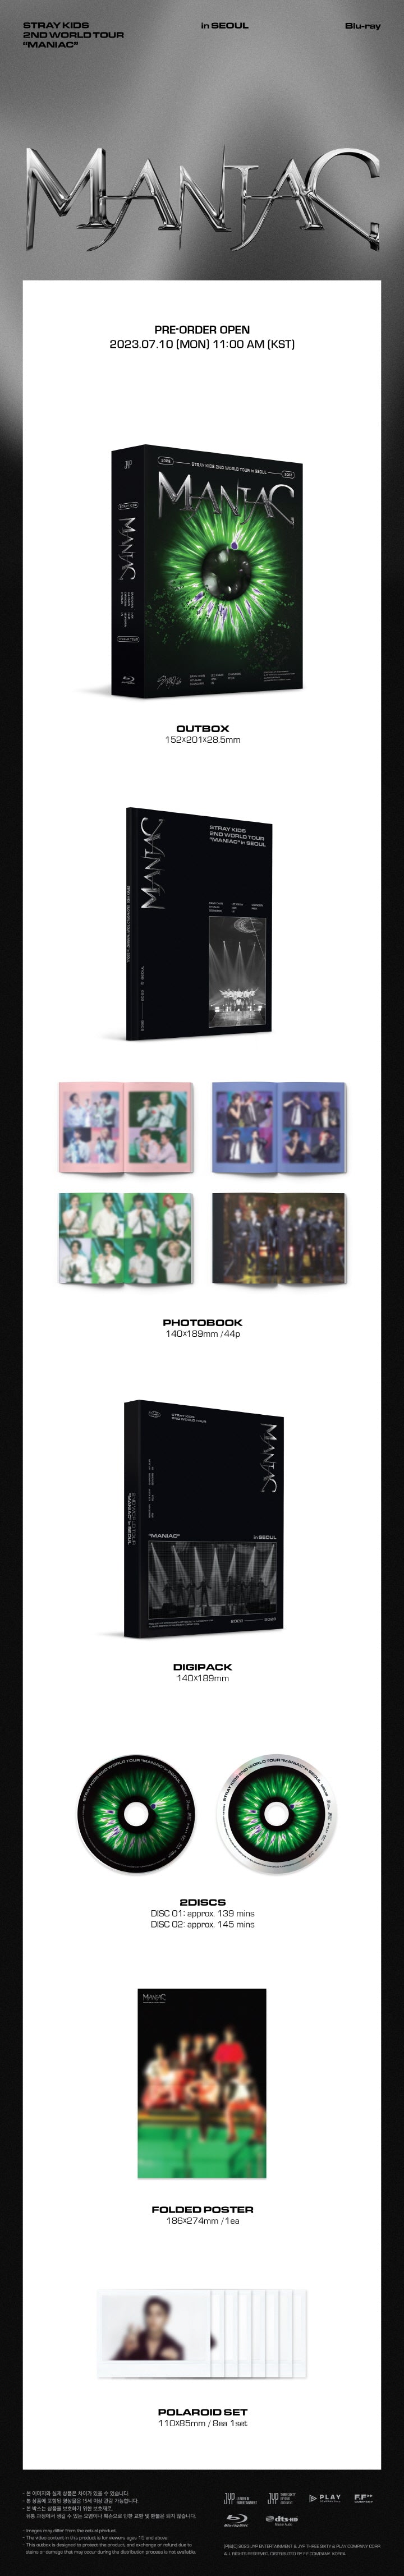 2 Blu-rays
1 Photo Book (44 pages)
1 Folded Poster
8 Polaroids